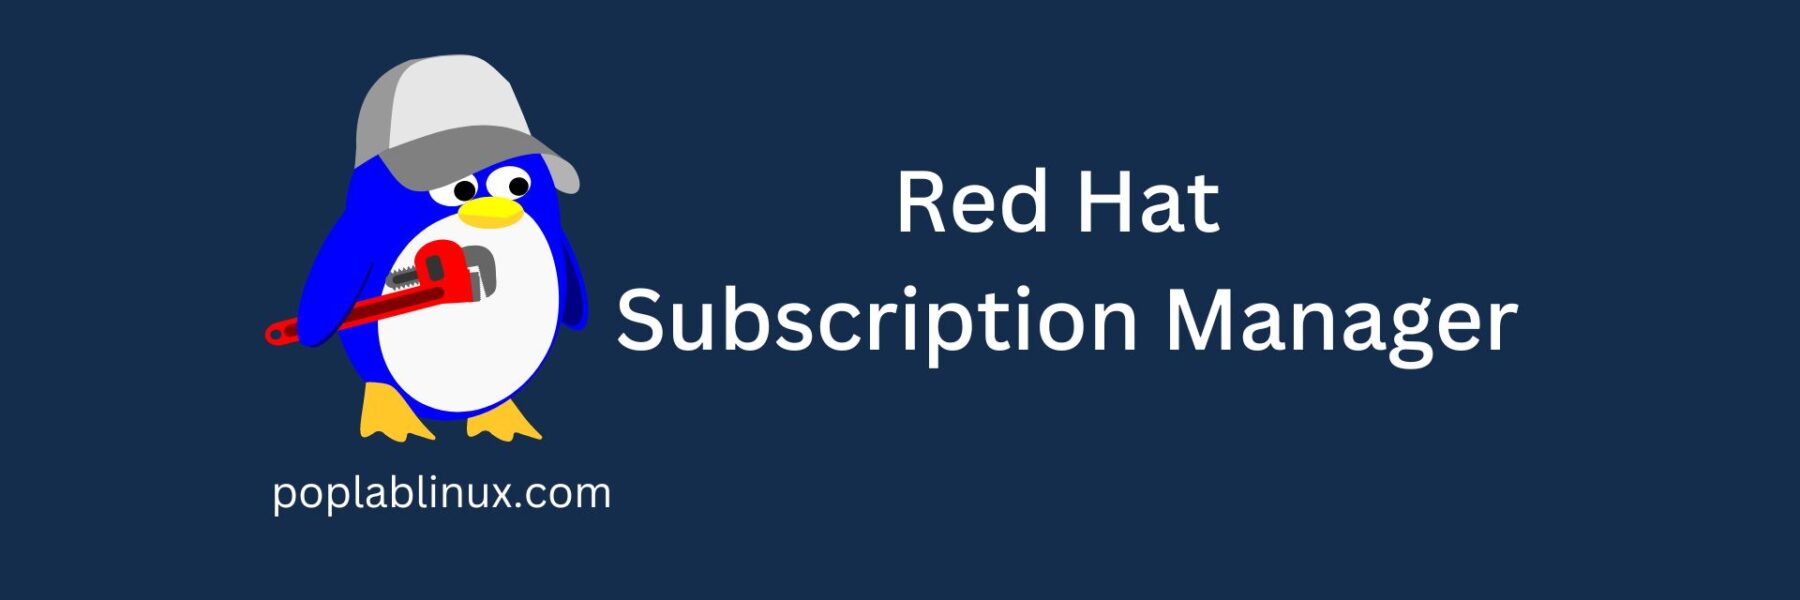 Red Hat Subscription Manager